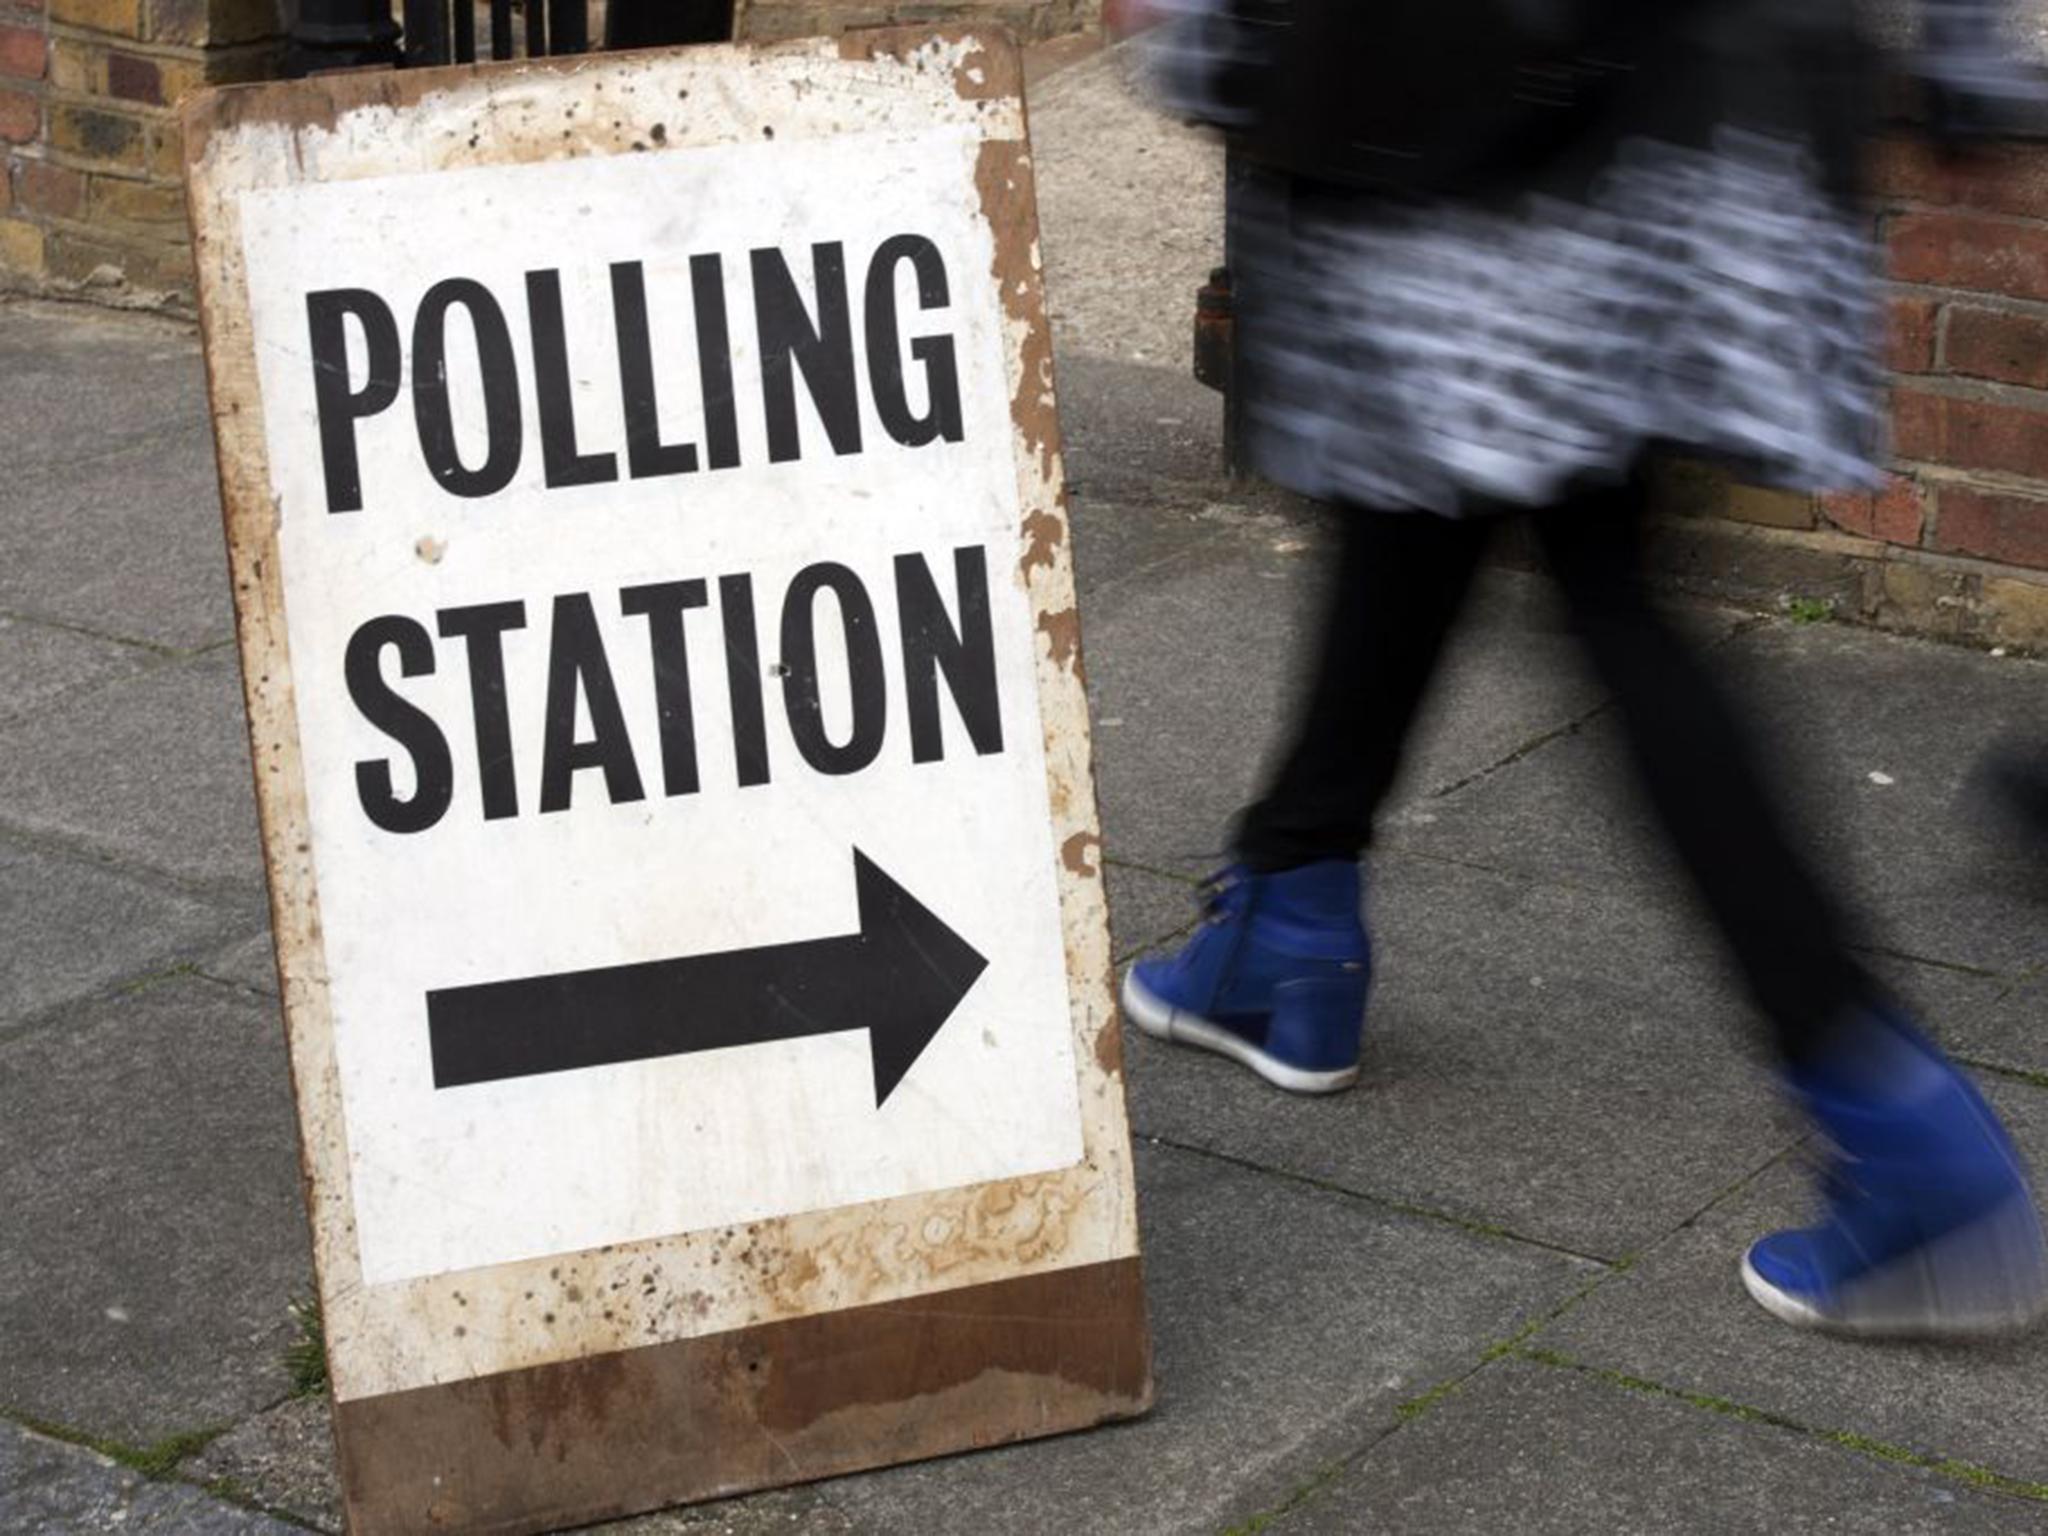 People pass a polling station sign in Brixton in 2015